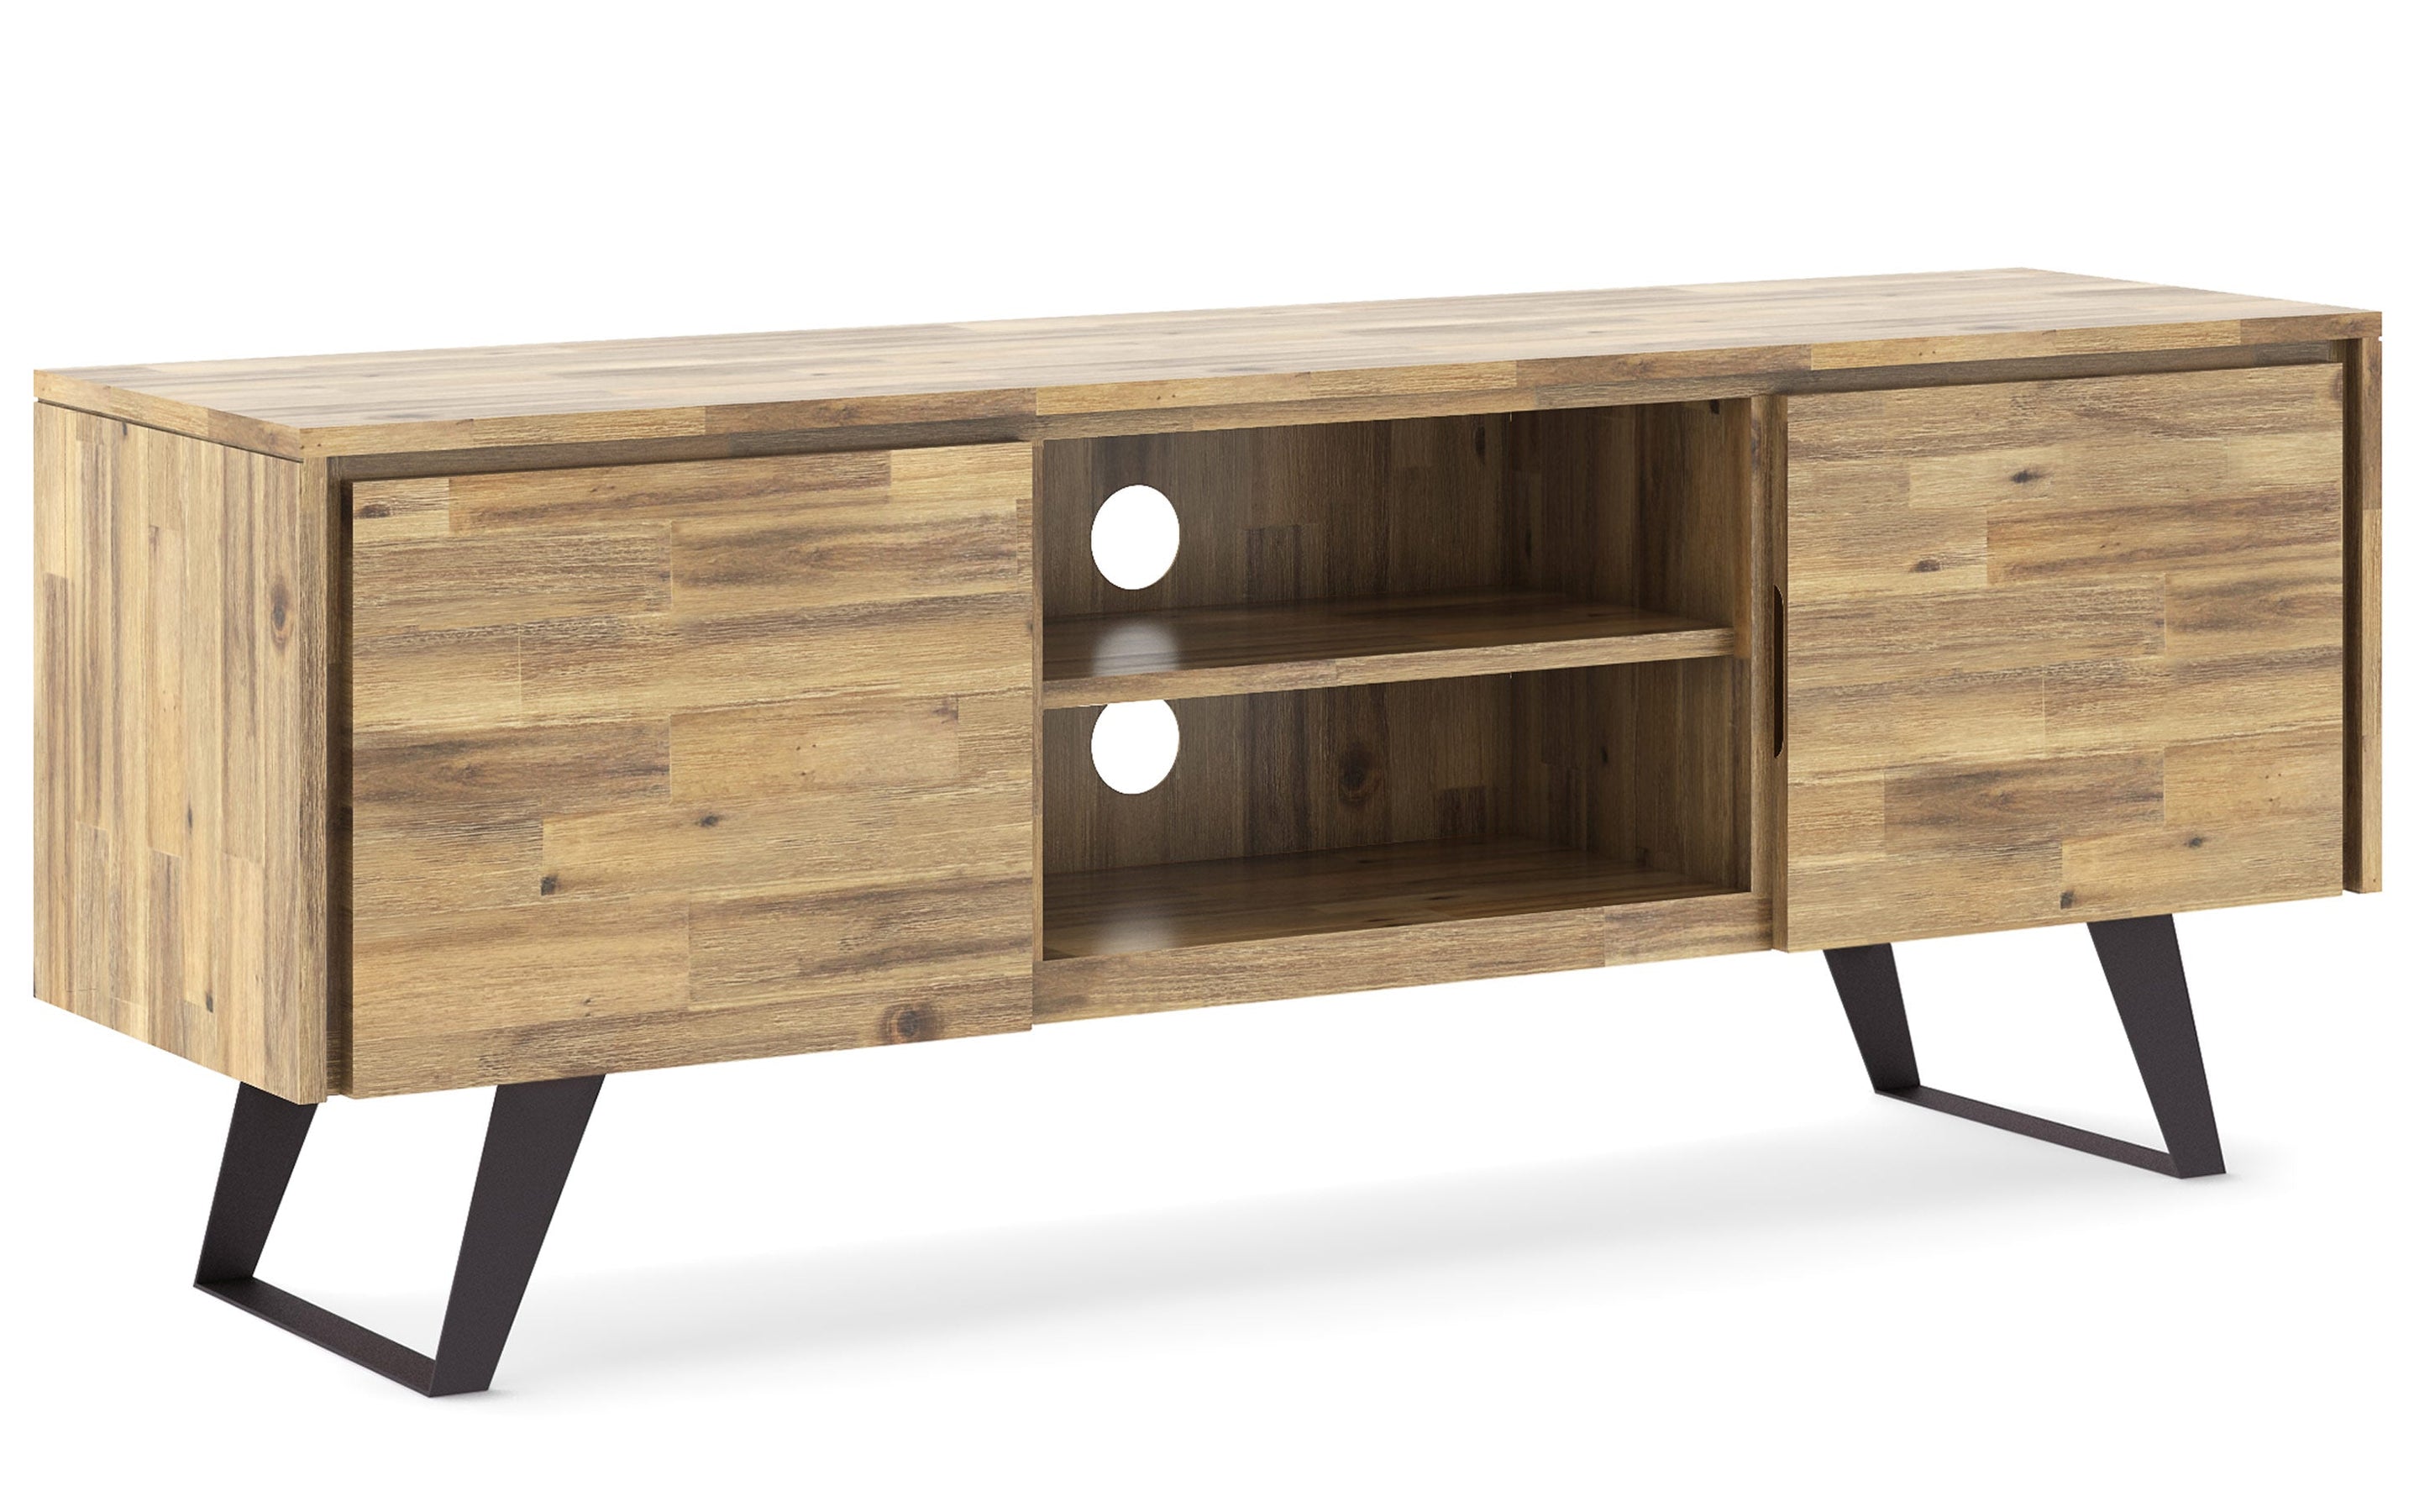 Distressed Golden Wheat Acacia | Lowry Solid Acacia Wood Wide TV Media Stand For TVs up to 70 Inches